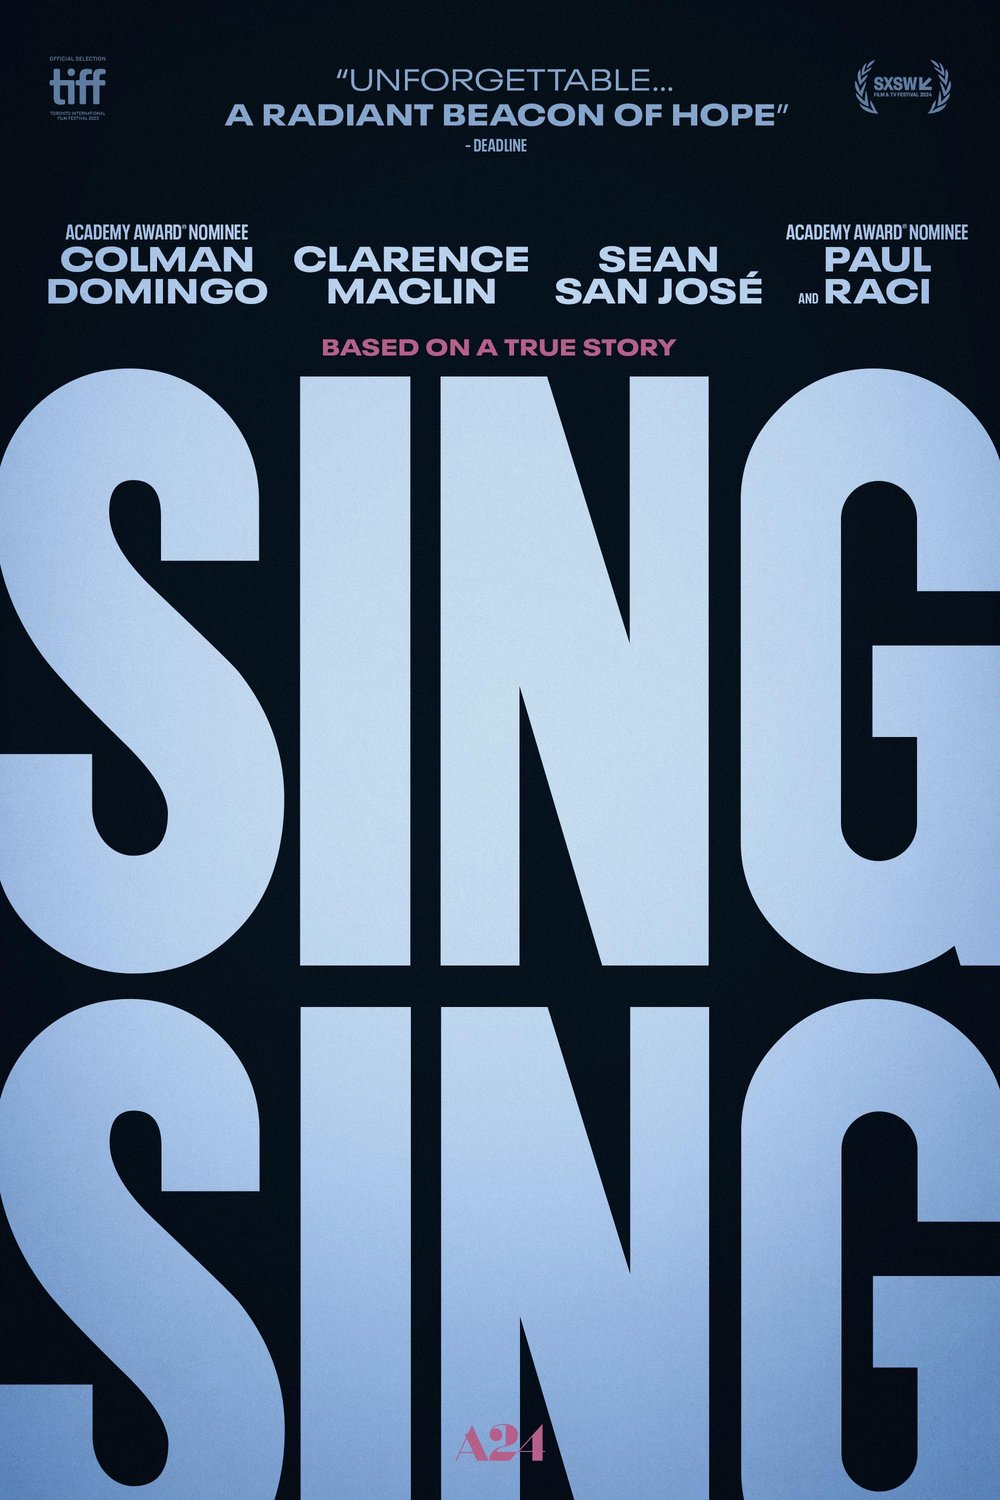 Poster of the movie Sing Sing